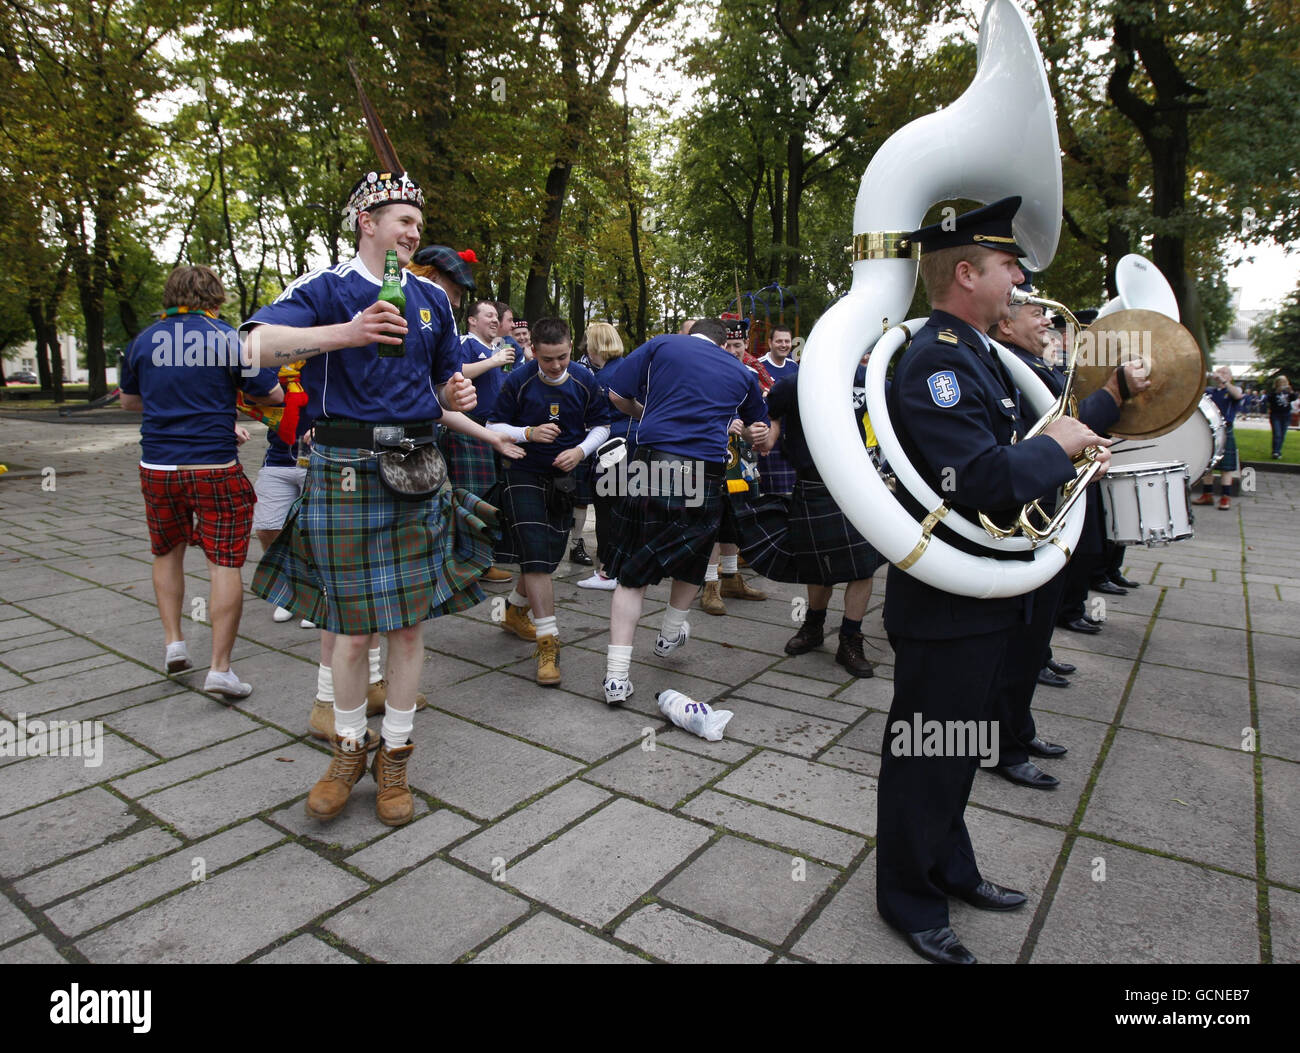 Scottish football fans having fun in the centre of Kaunas as a local Lithunania brass band play in the streets ahead of the UEFA European Championship Qualifing match at the Darius Girenas Stadium, Kaunas. Stock Photo